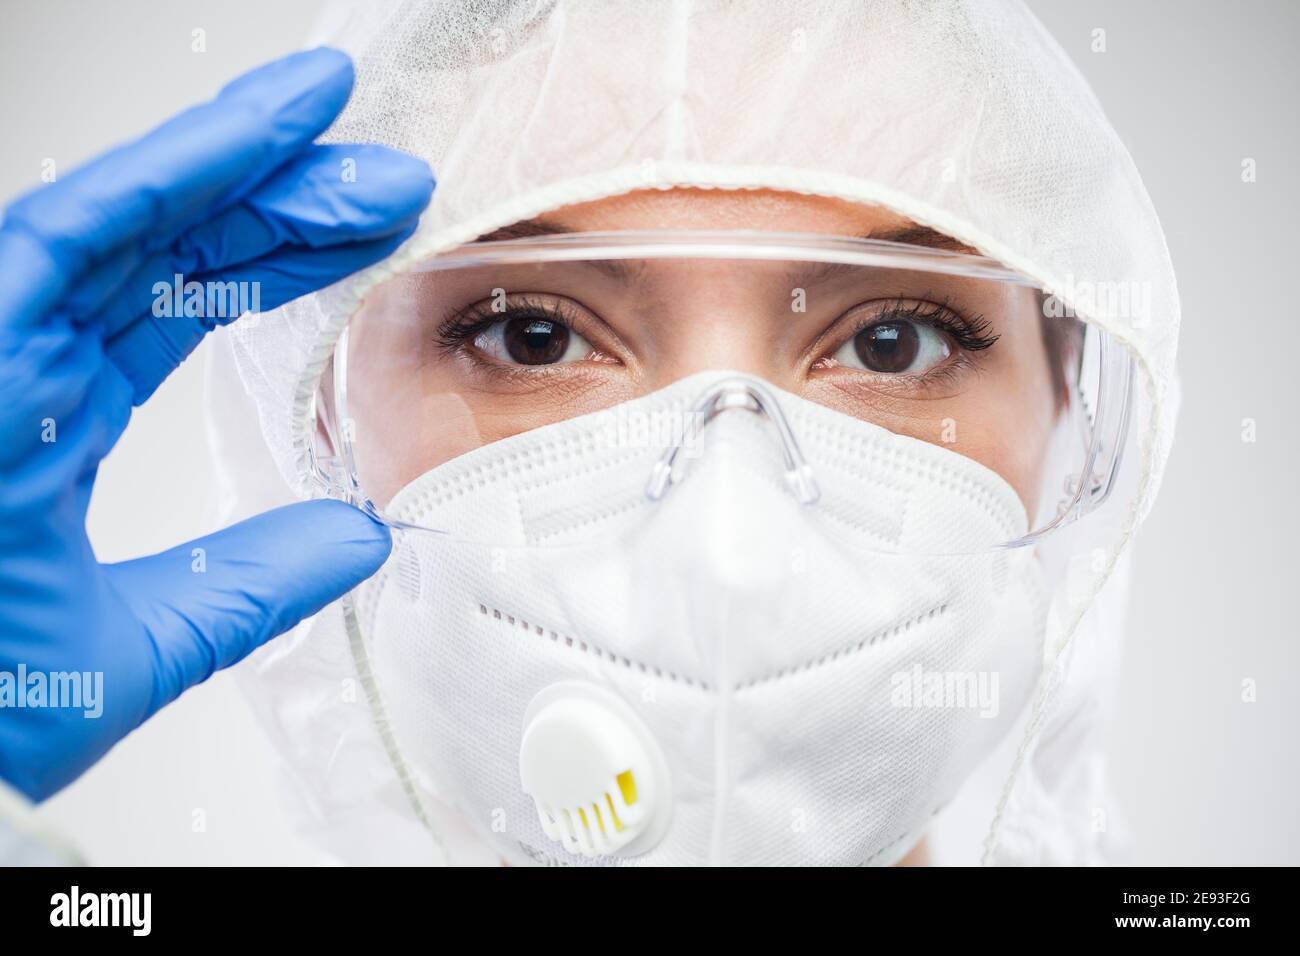 Female lab scientist,doctor or nurse,putting protective eyewear goggles,wearing blue gloves,N95,PPE clean suit,portrait of UK NHS front line medical s Stock Photo